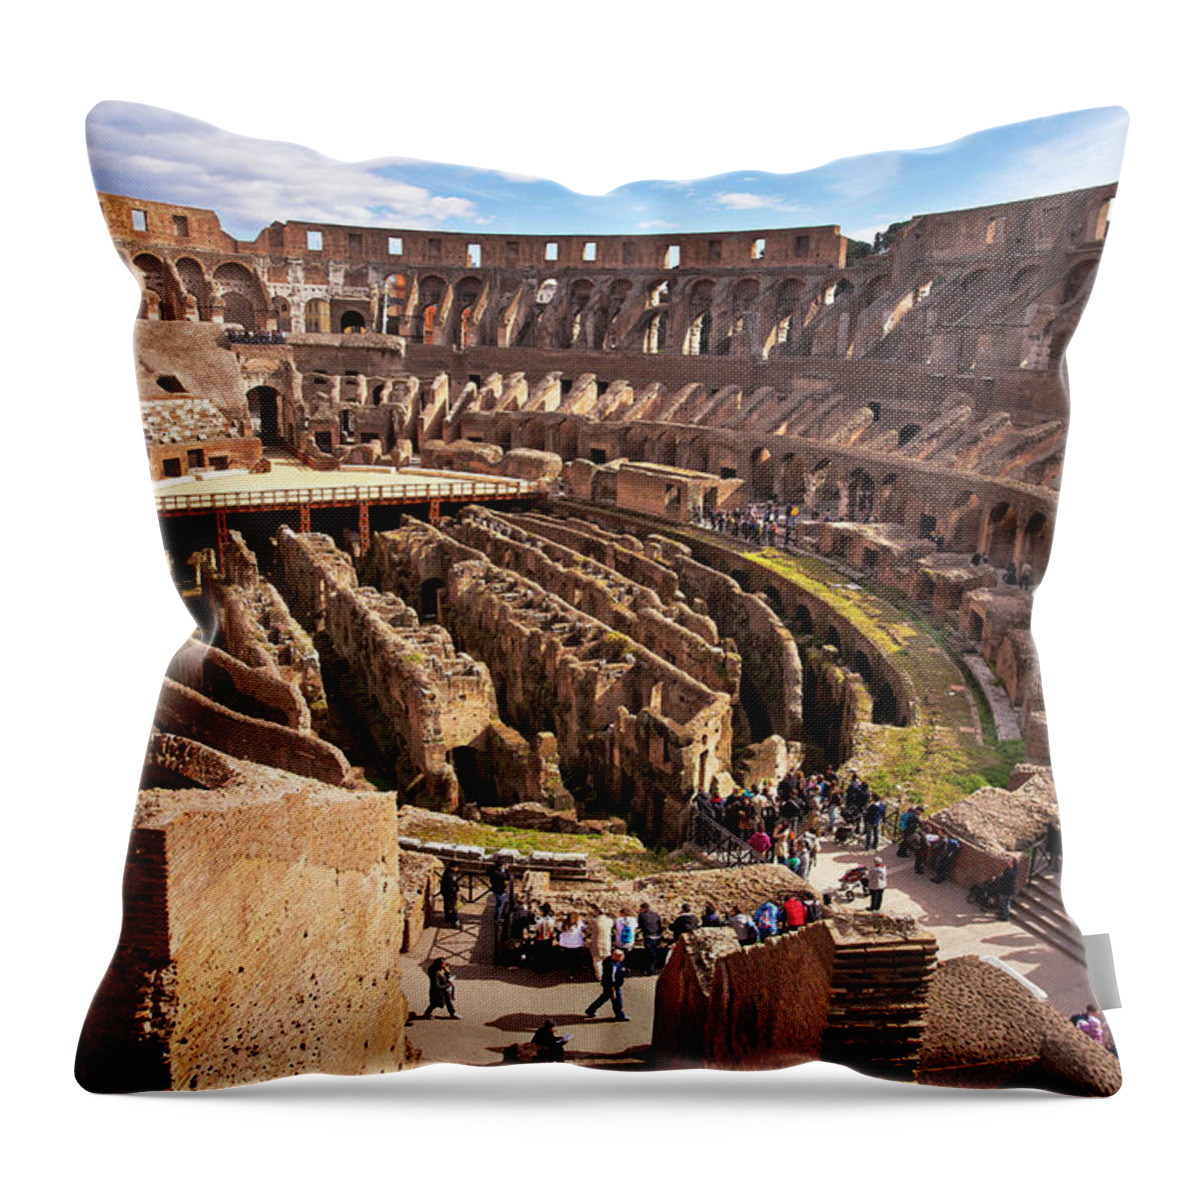 Estock Throw Pillow featuring the digital art Rome, Tourists, Italy by Claudia Uripos